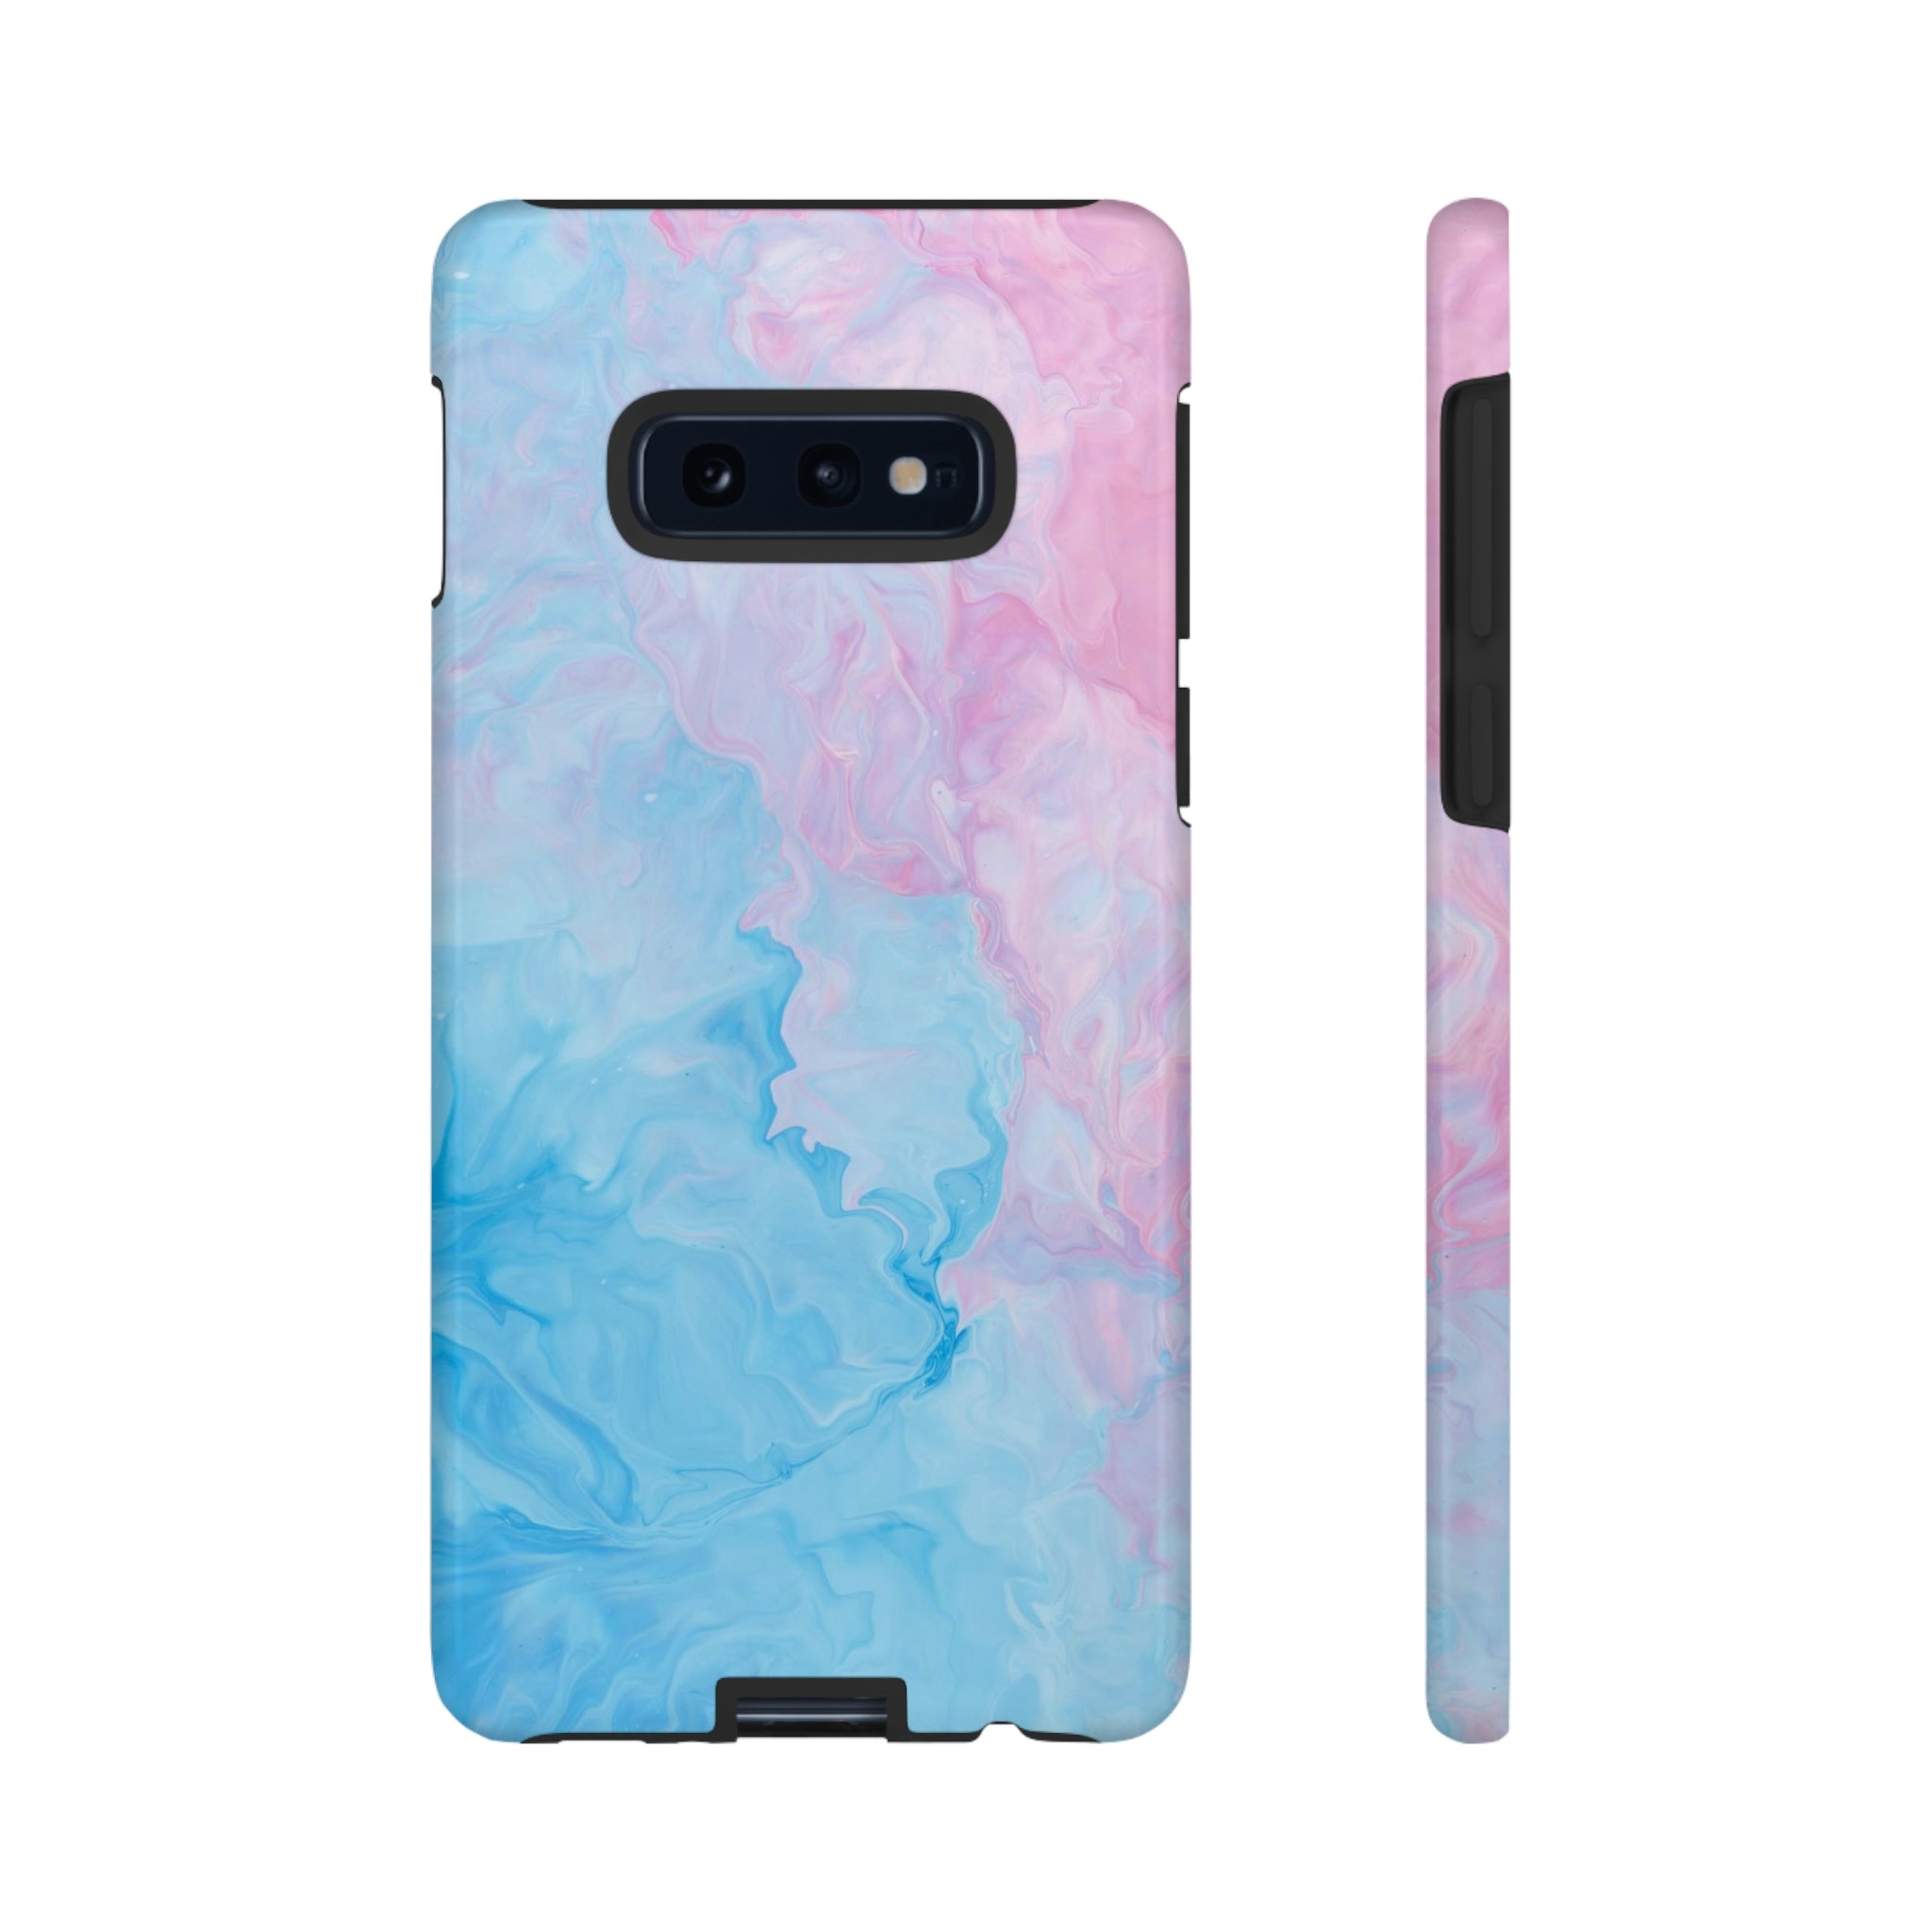 Cotton Candy - Dual Layered, Full Body, Armored Phone Case for iPhone 13/Samsung Galaxy S22/Google Pixel 6Smartphone CasesStreamLiteStreamLite